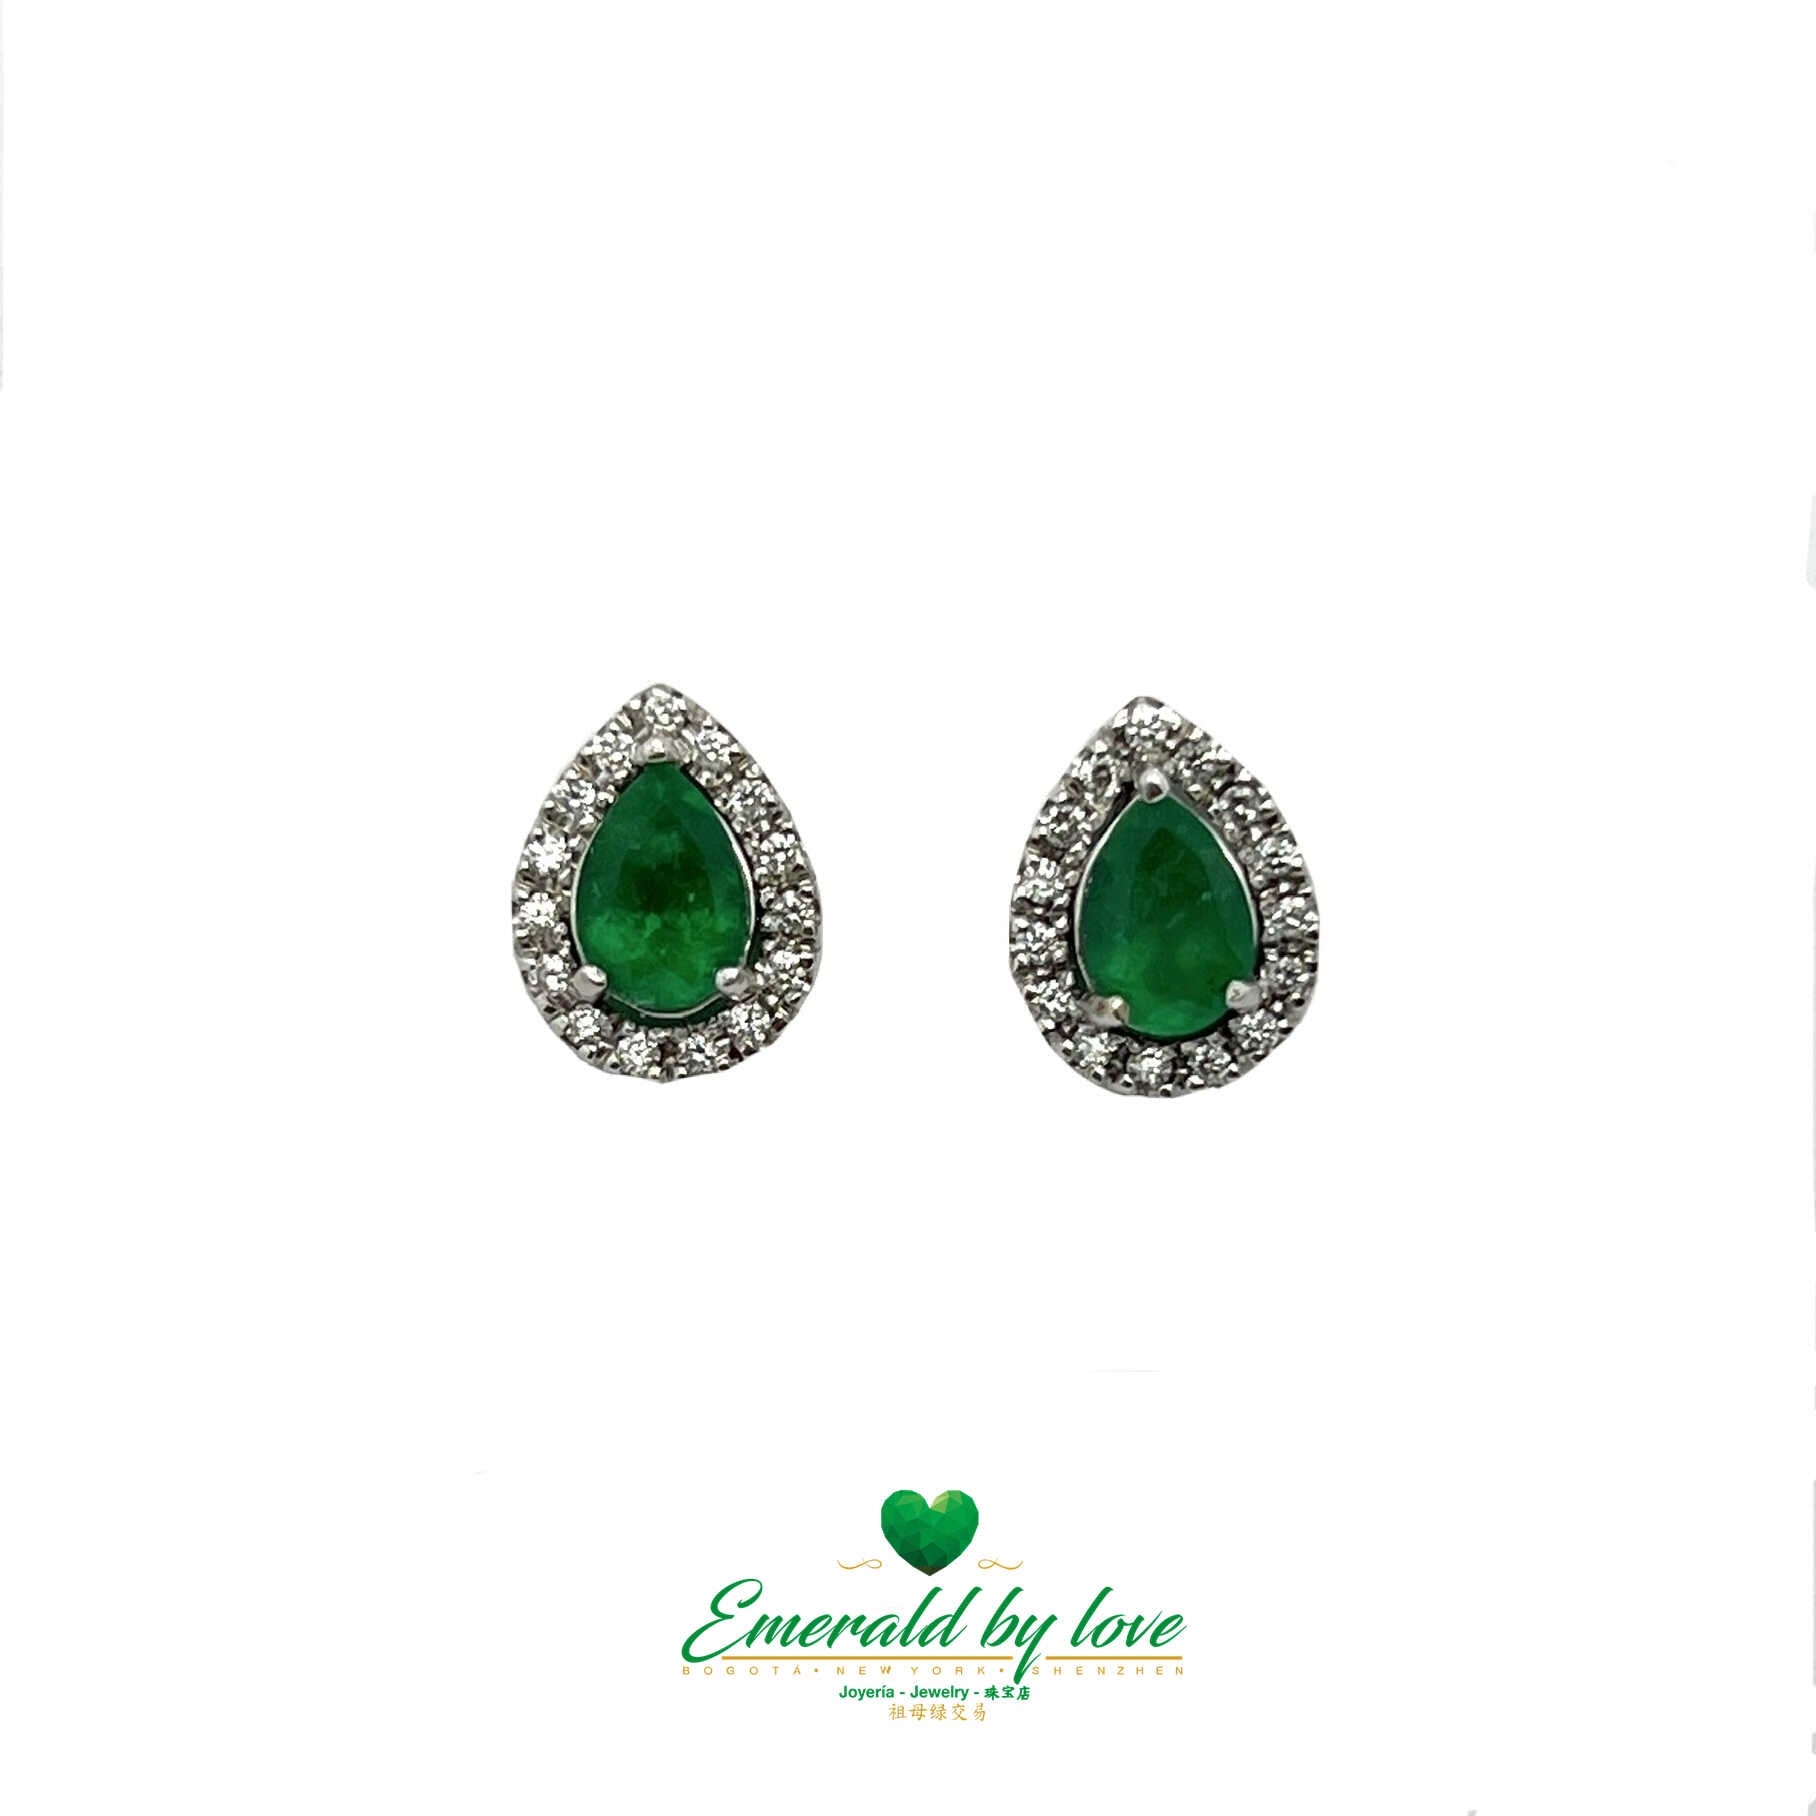 Intriguing Marquise White Gold Earrings with 1.2 Ct Teardrop Emeralds and 0.3 Ct Diamonds